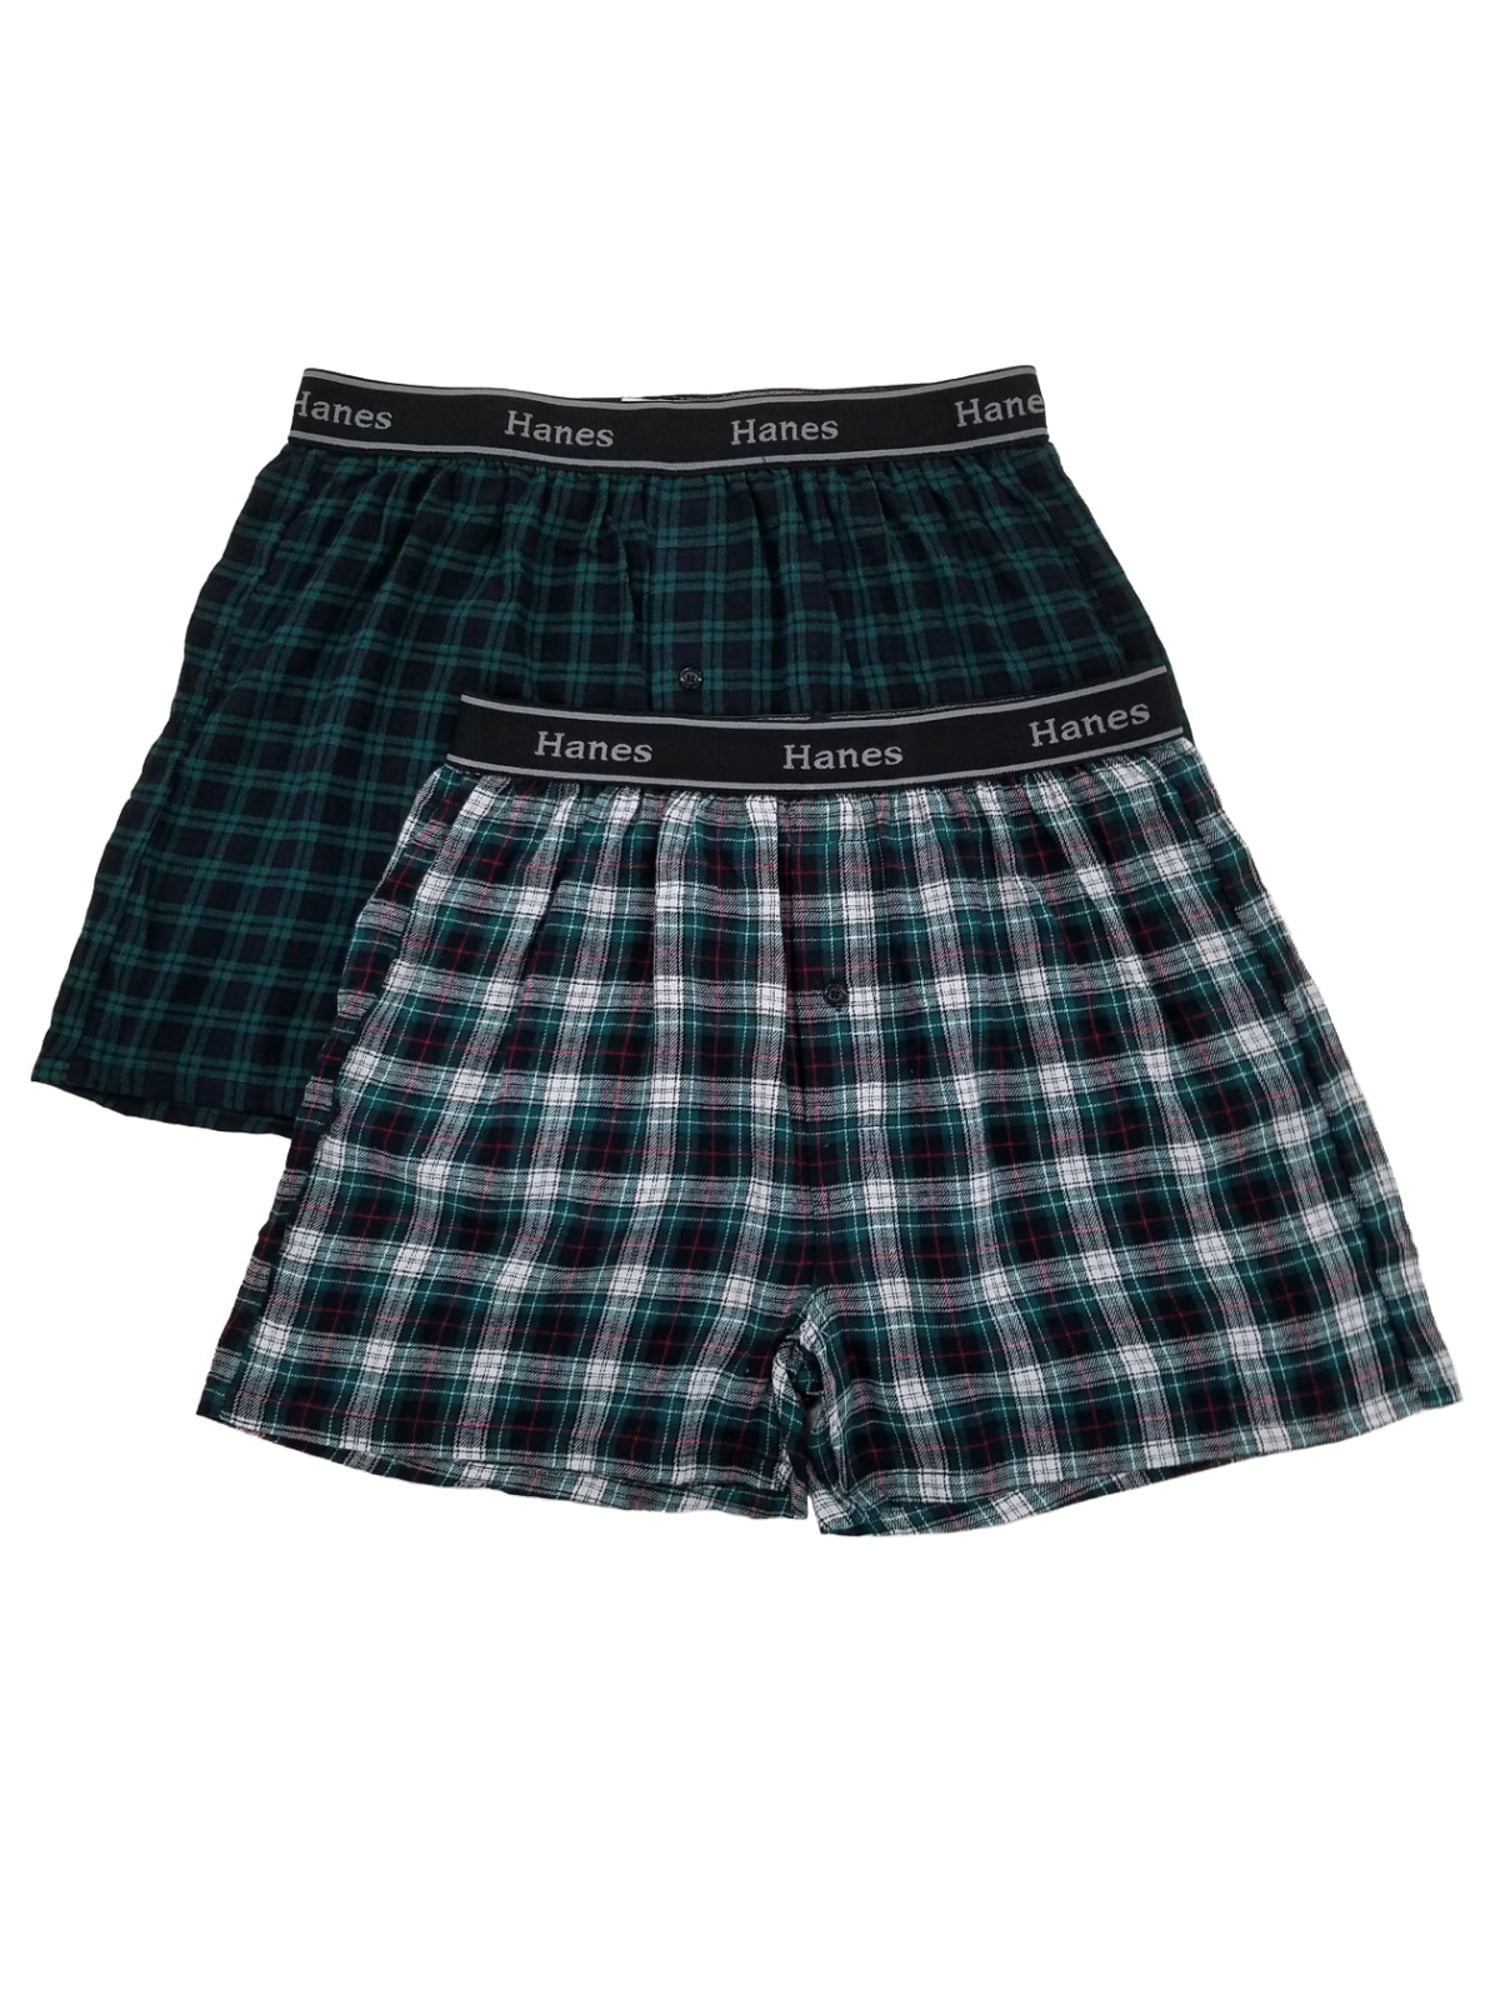 Hanes Mens 2-Pack Green & Navy Blue Plaid Flannel Boxer Shorts ...